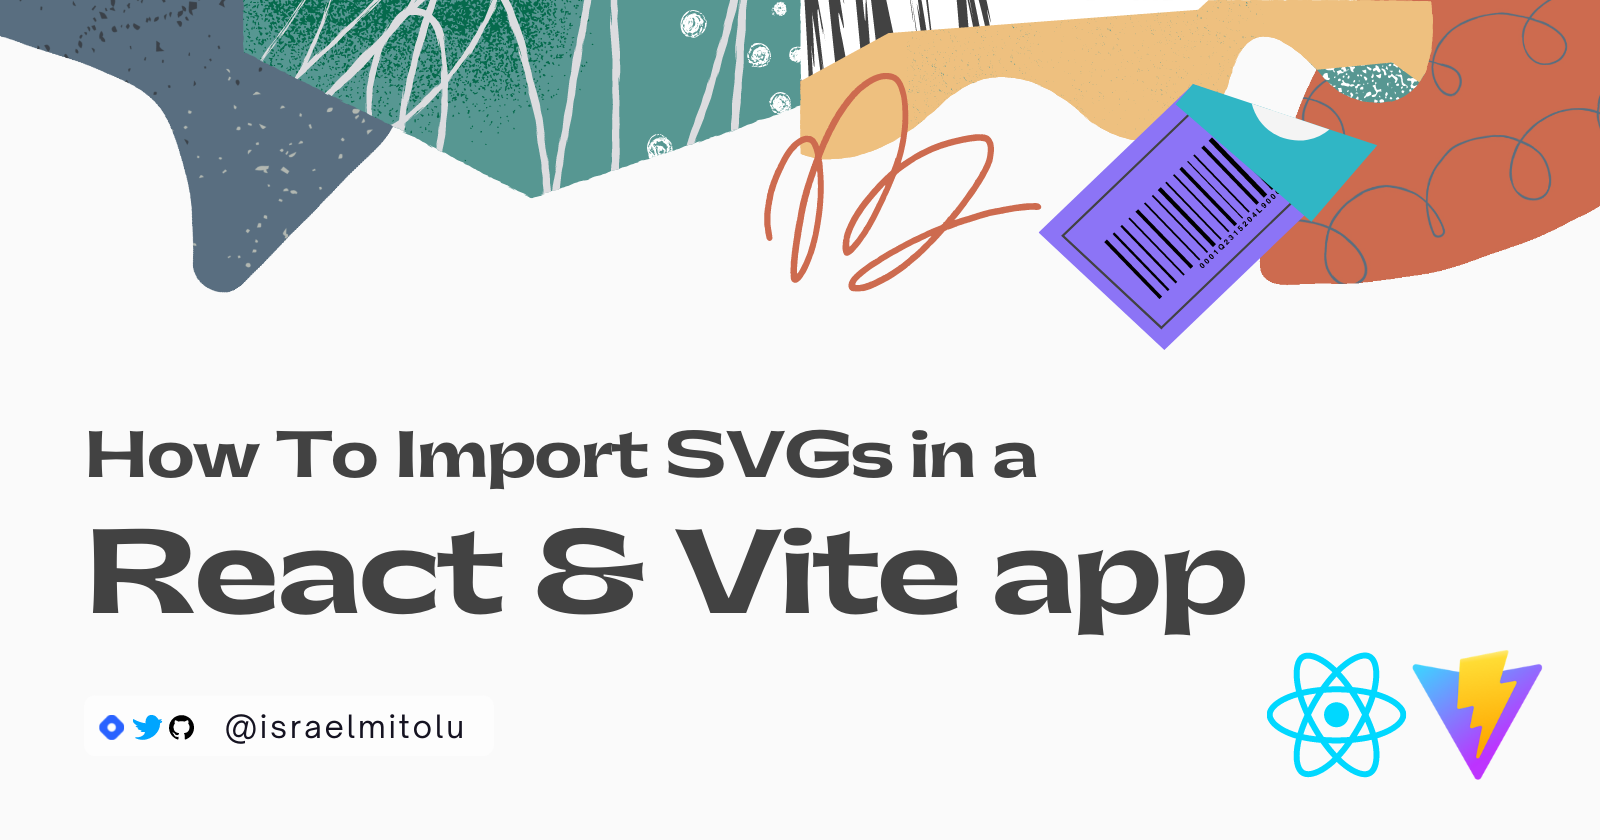 How to Import SVGs in a React and Vite app